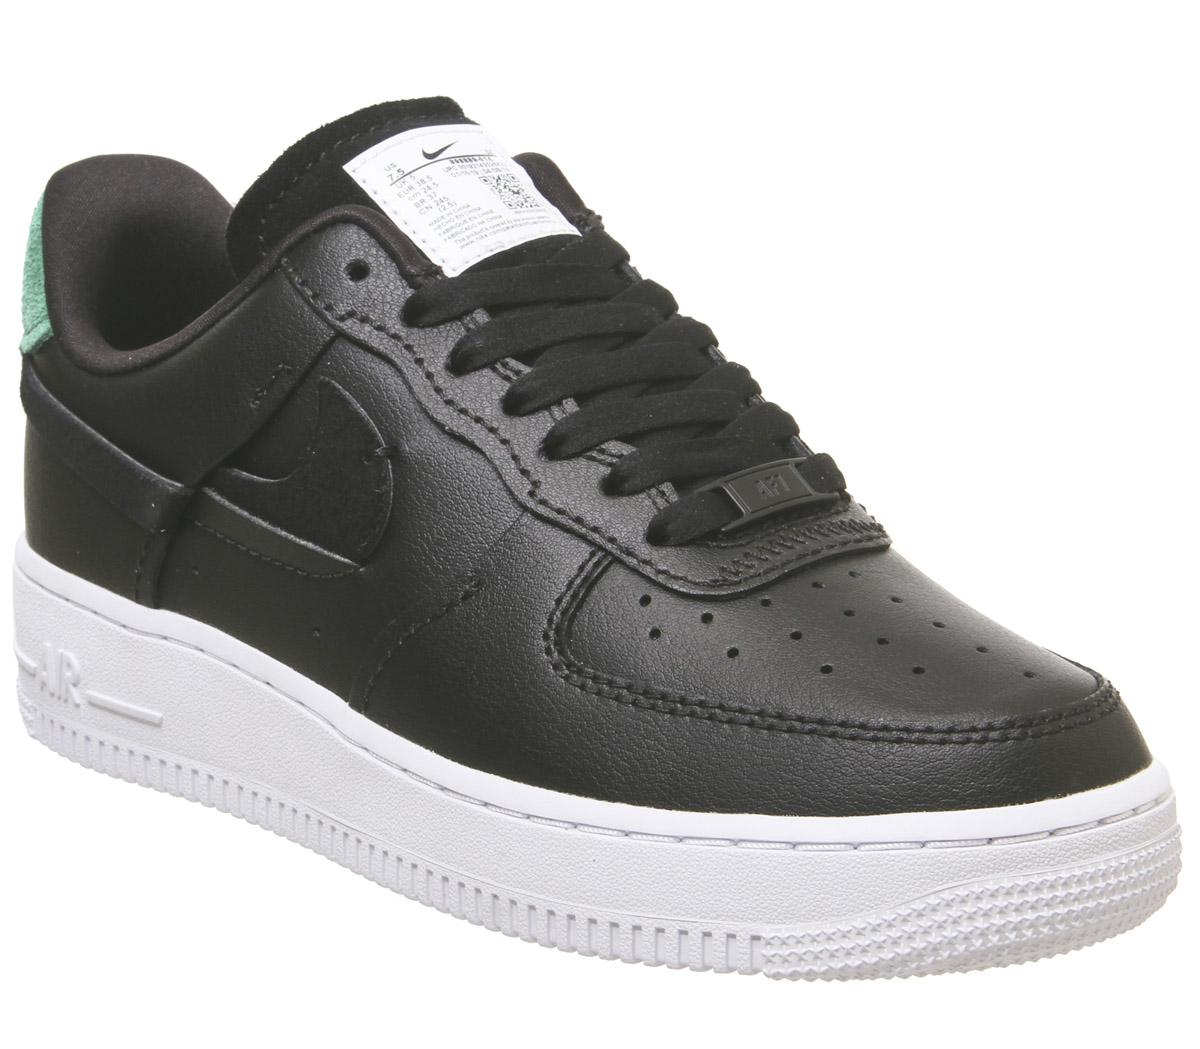 black air force 1 07 trainers